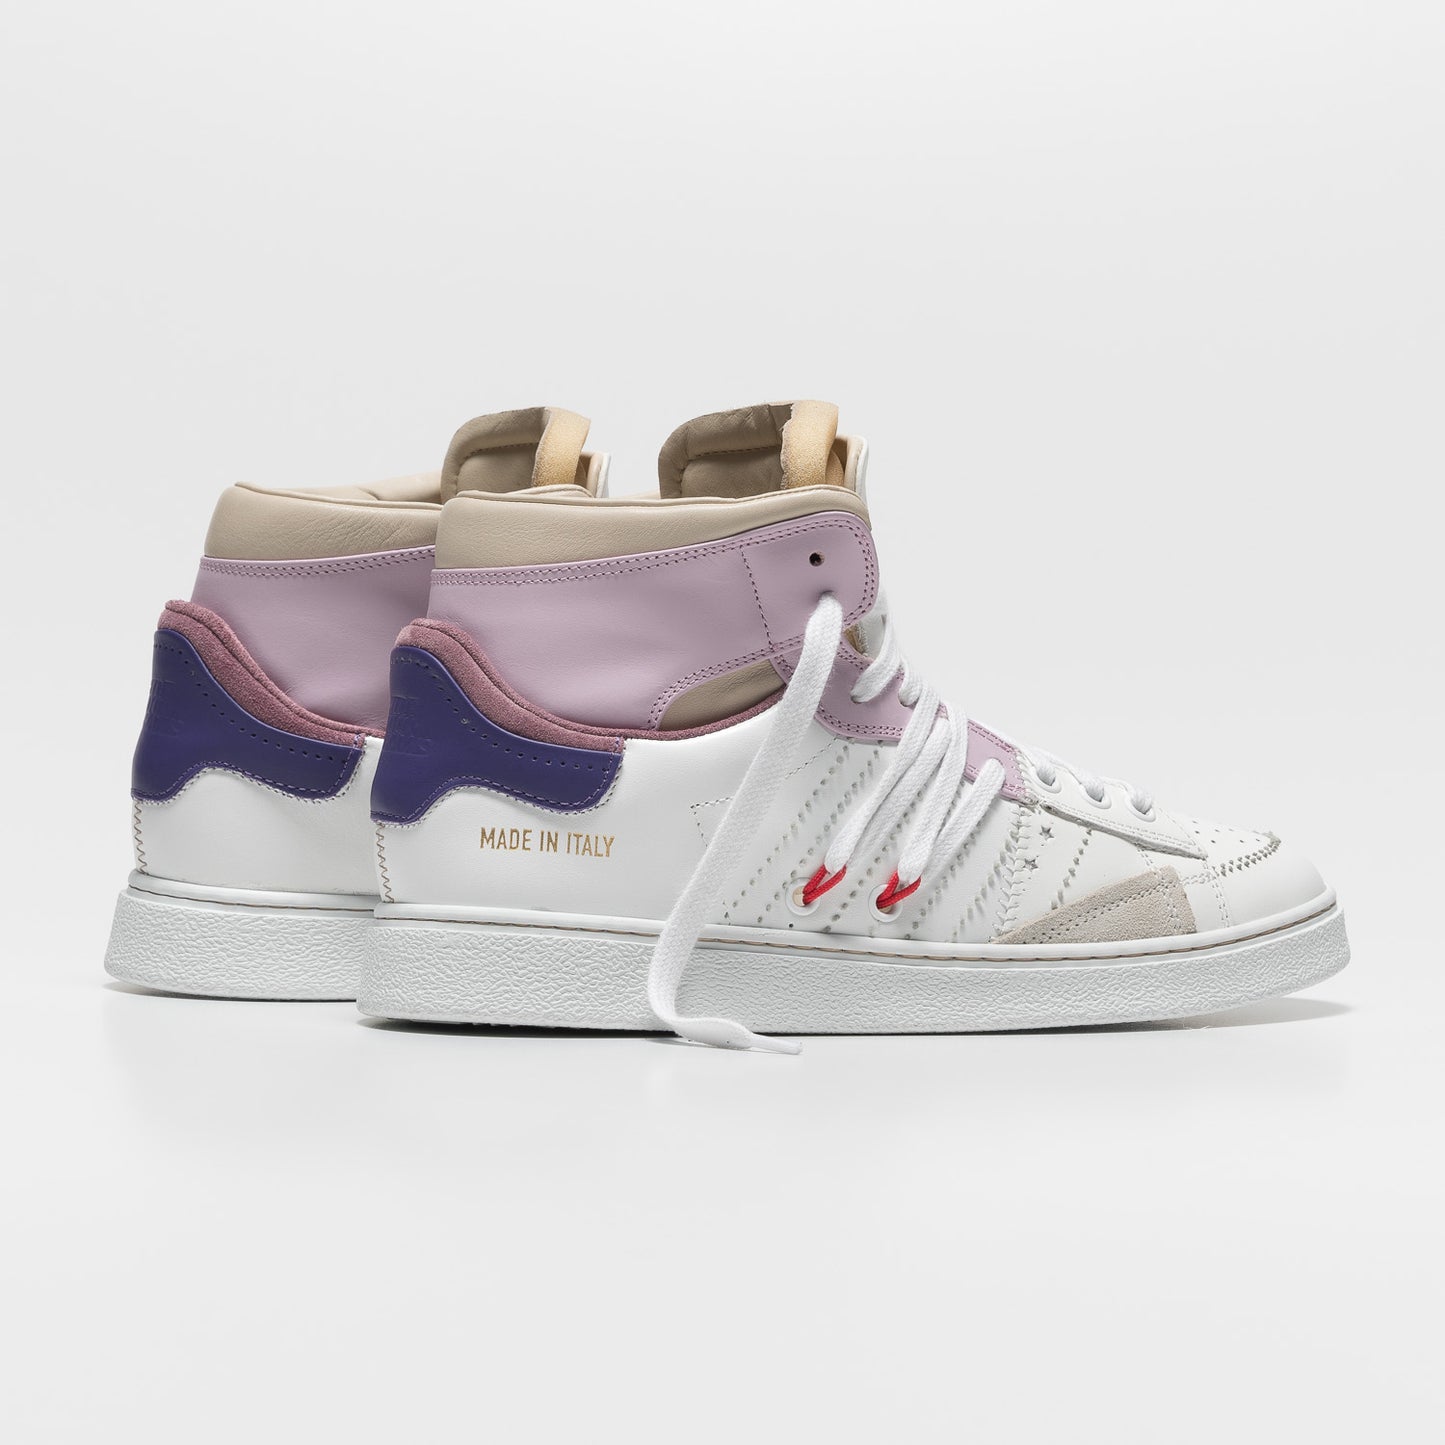 The Cage Dual, White/Lavender, Sneaker